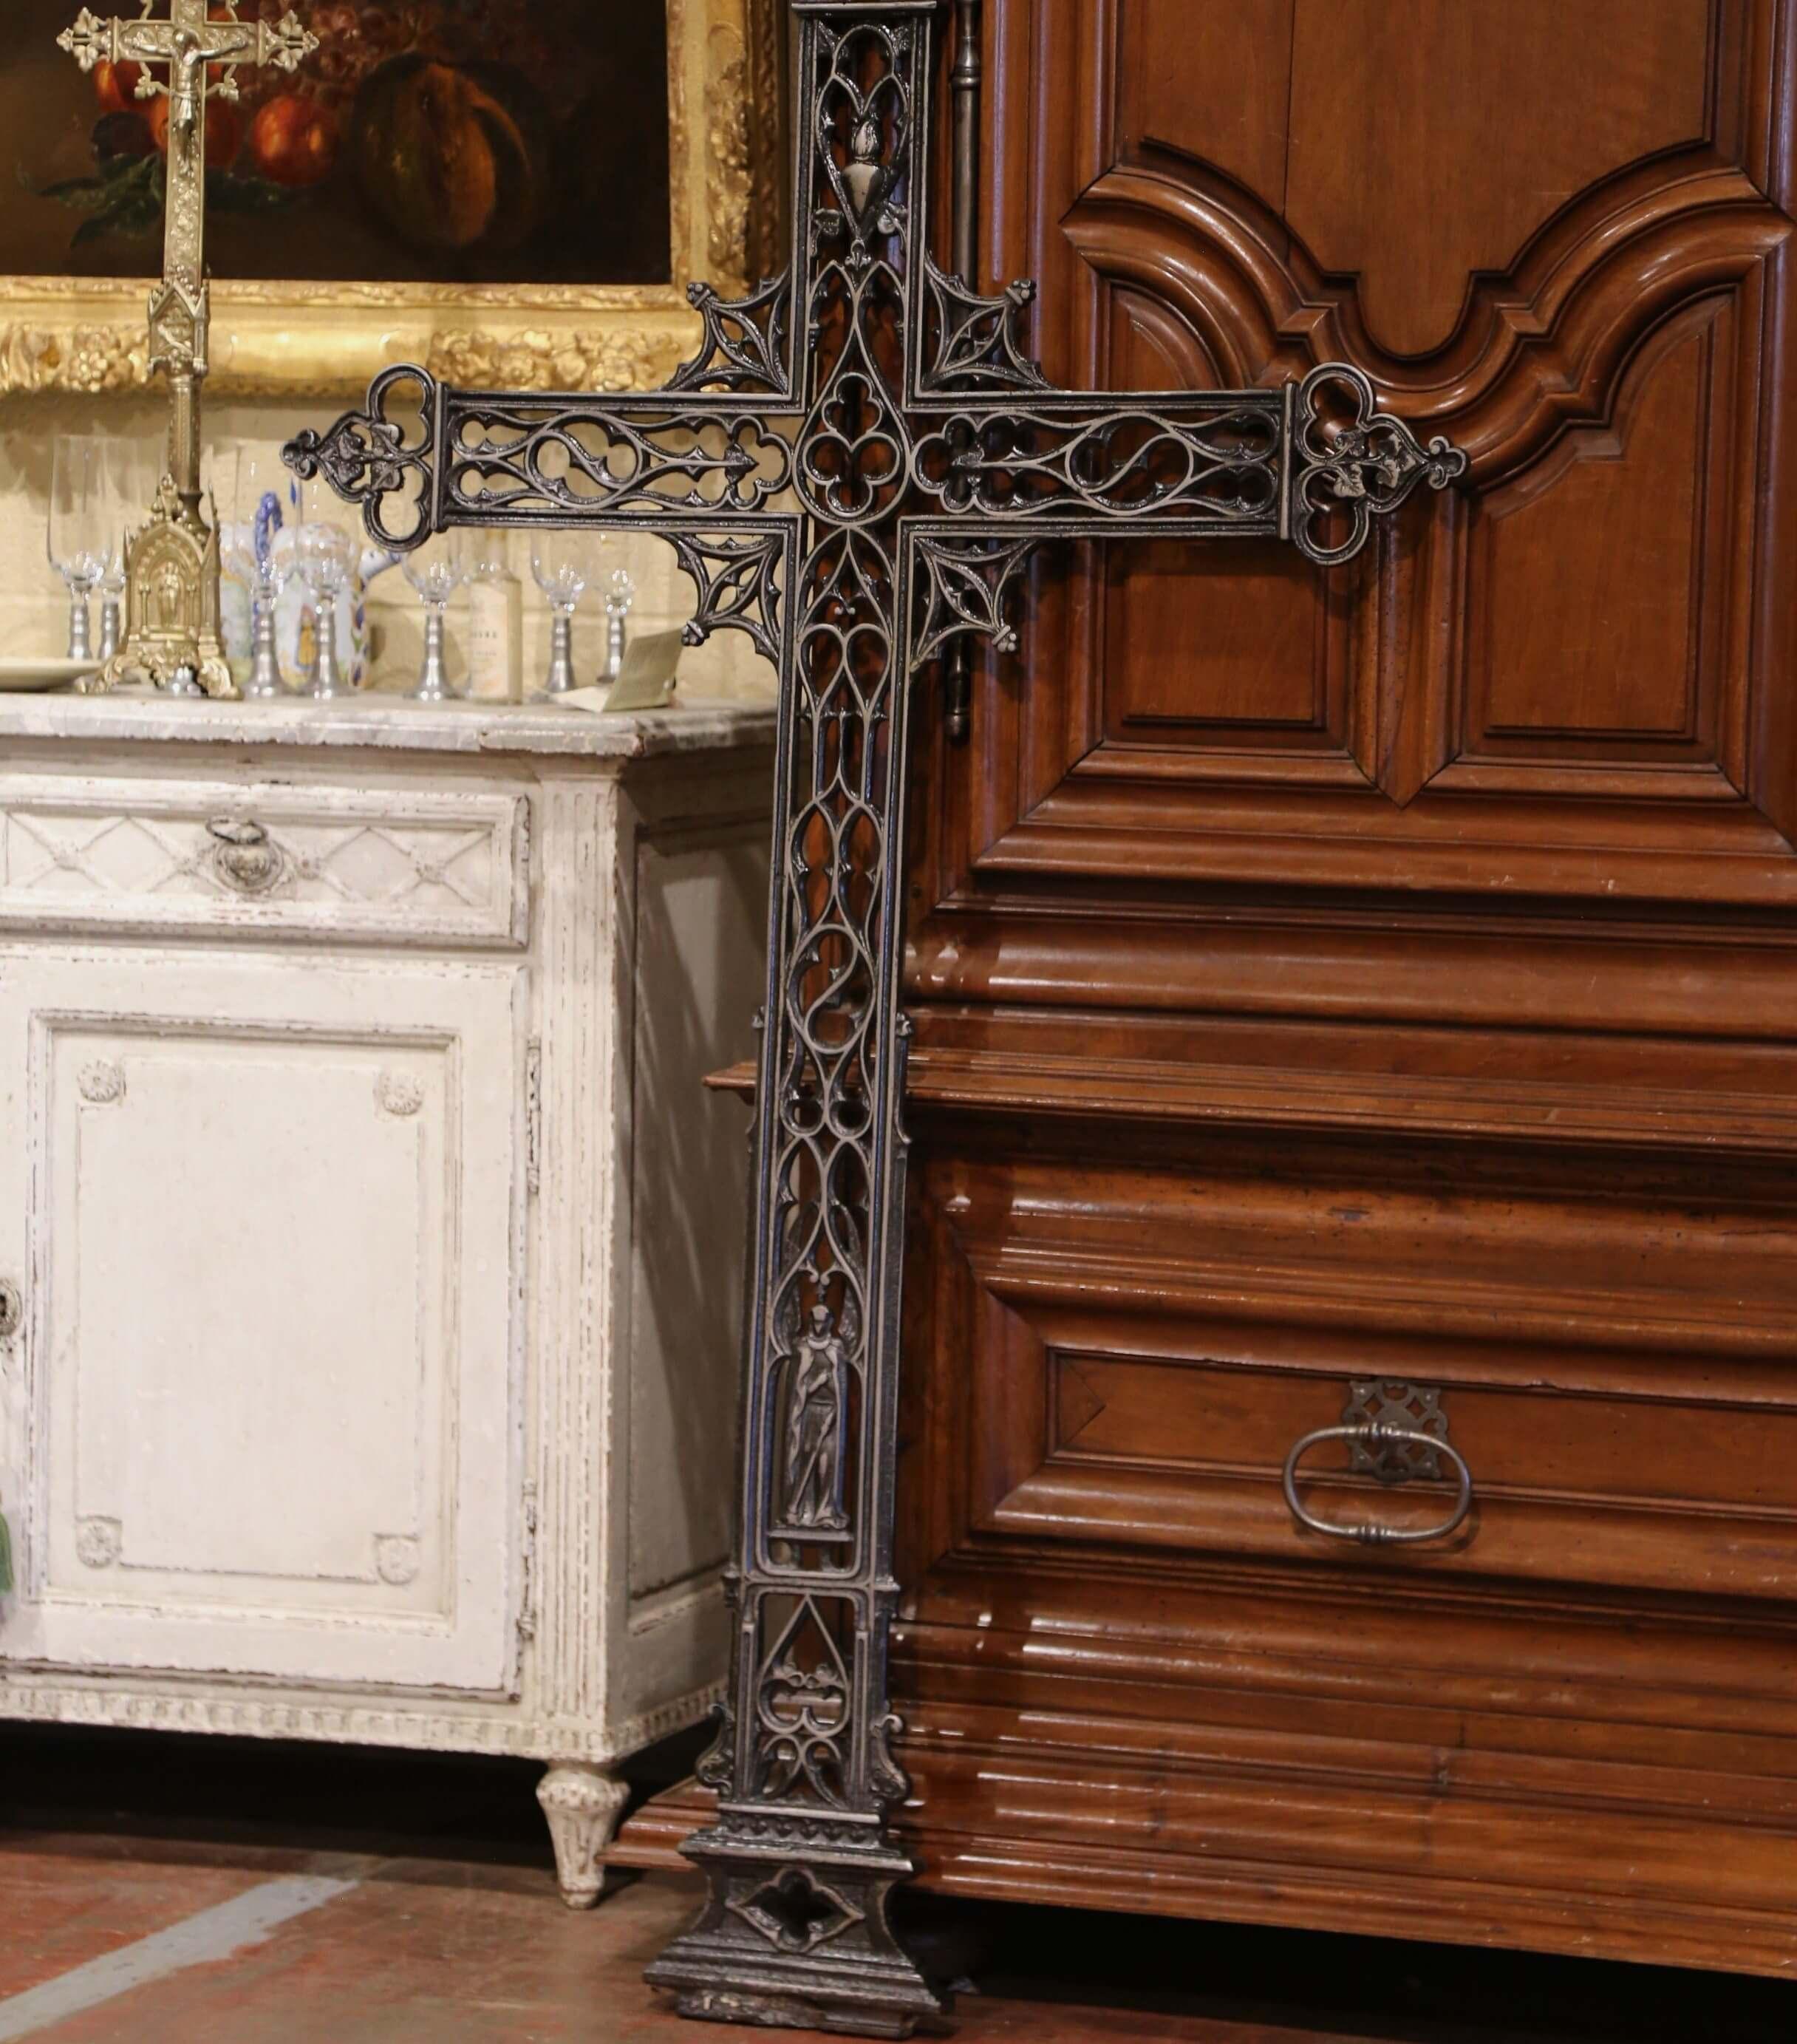 This beautiful antique cross was crafted in France, circa 1870. The large iron religious item decorated with scroll and floral motifs is embellished with the Virgin Mary at the bottom. The tall religious cross is in excellent condition and adorns a